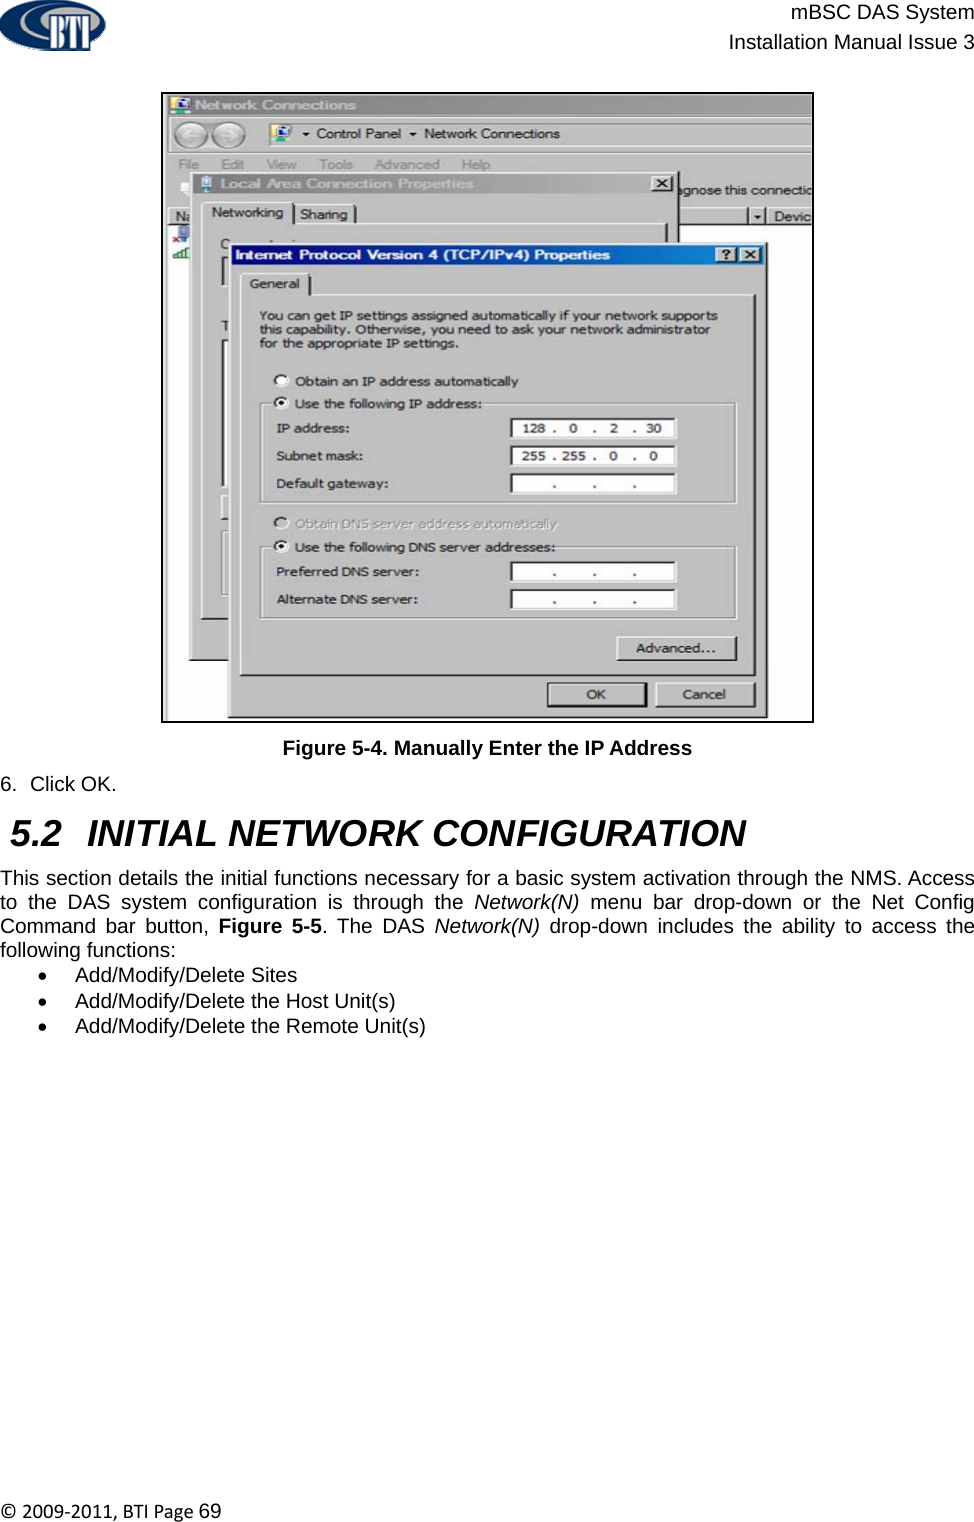                          mBSC DAS System  Installation Manual Issue 3  ©2009‐2011,BTIPage69  Figure 5-4. Manually Enter the IP Address 6. Click OK.  5.2  INITIAL NETWORK CONFIGURATION This section details the initial functions necessary for a basic system activation through the NMS. Access to the DAS system configuration is through the Network(N) menu bar drop-down or the Net Config  Command bar button, Figure 5-5. The DAS Network(N) drop-down includes the ability to access the following functions: • Add/Modify/Delete Sites • Add/Modify/Delete the Host Unit(s) •  Add/Modify/Delete the Remote Unit(s)   